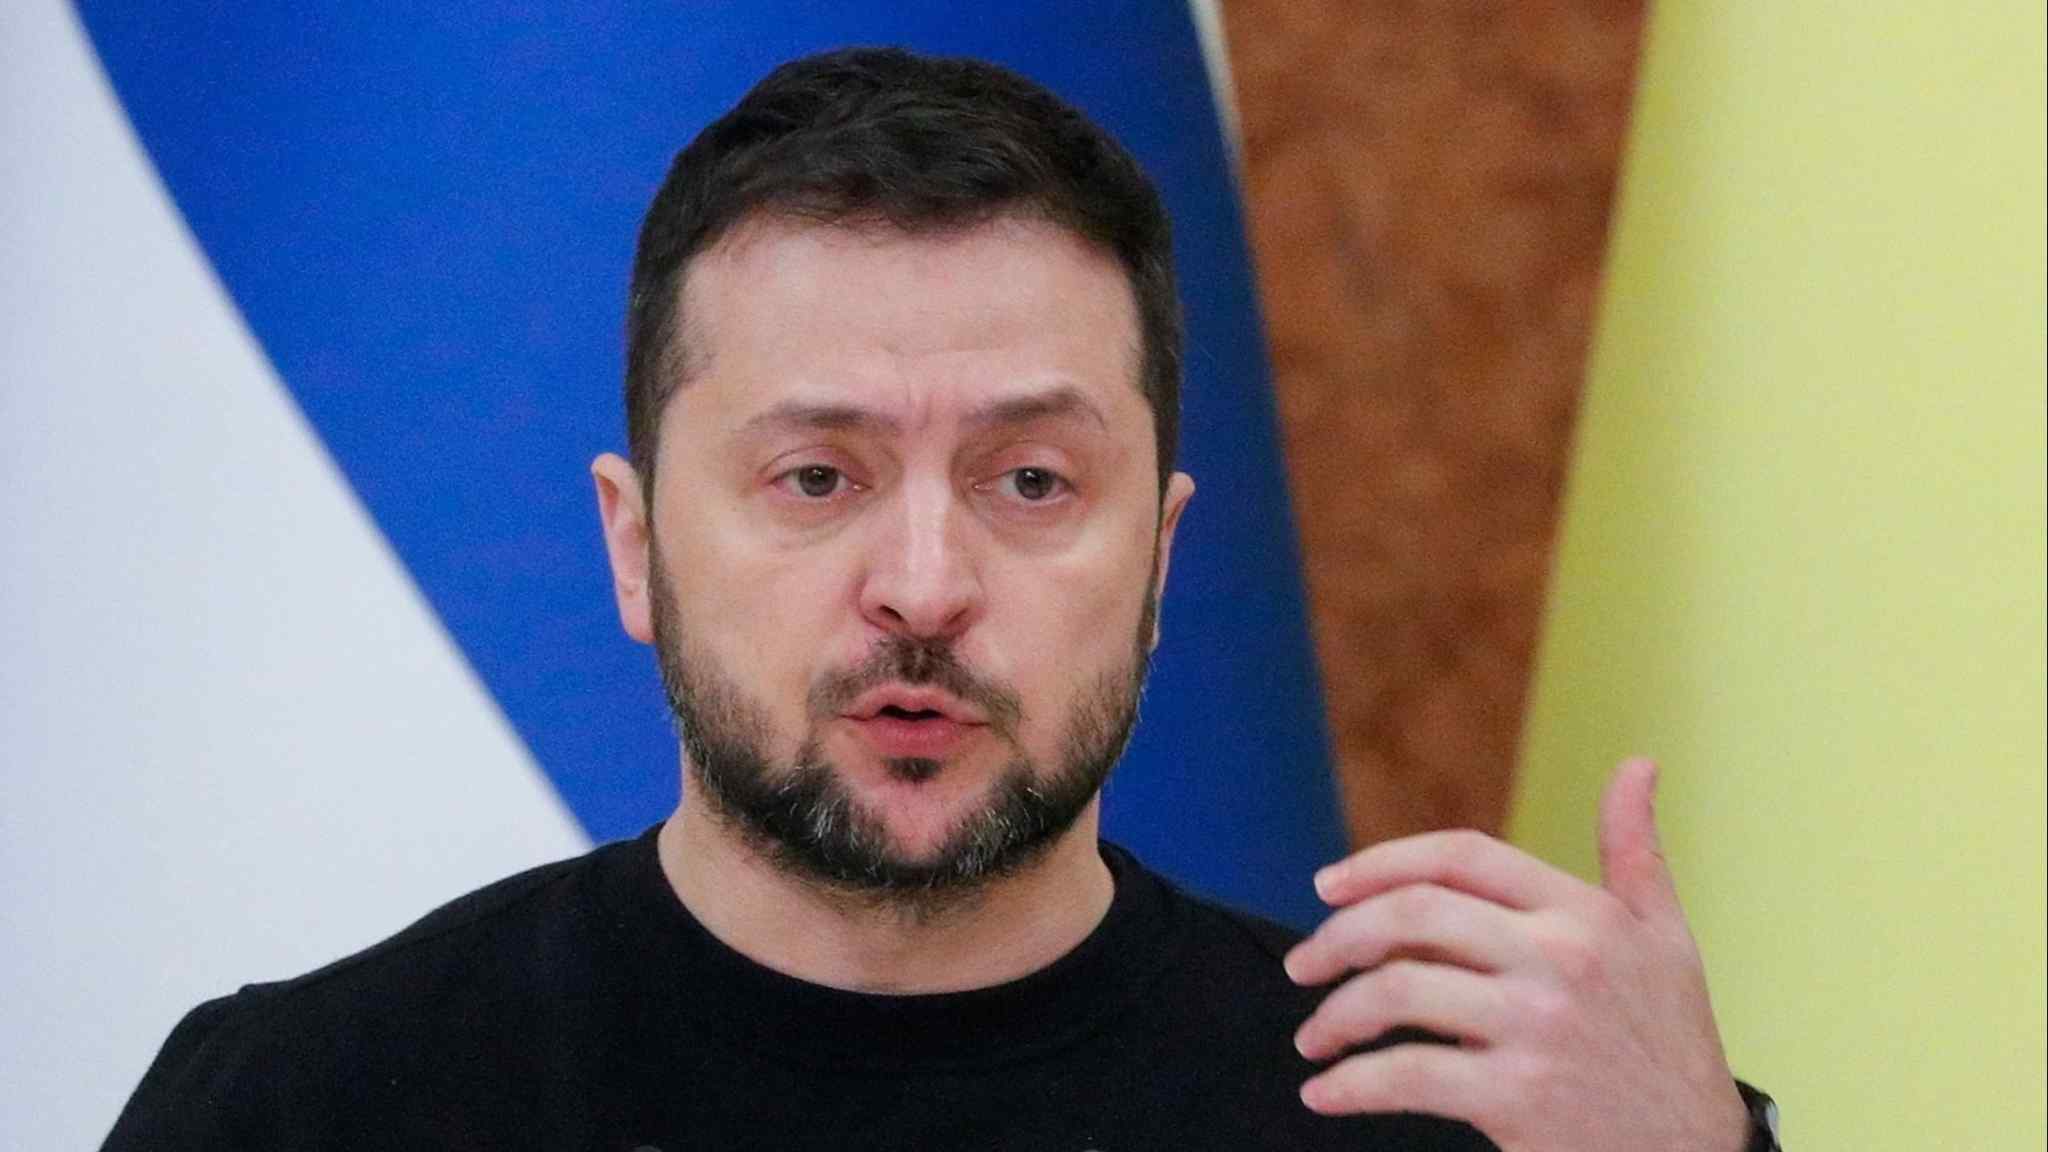 Anatomy of a scandal: why Zelenskyy launched a corruption crackdown in Ukraine